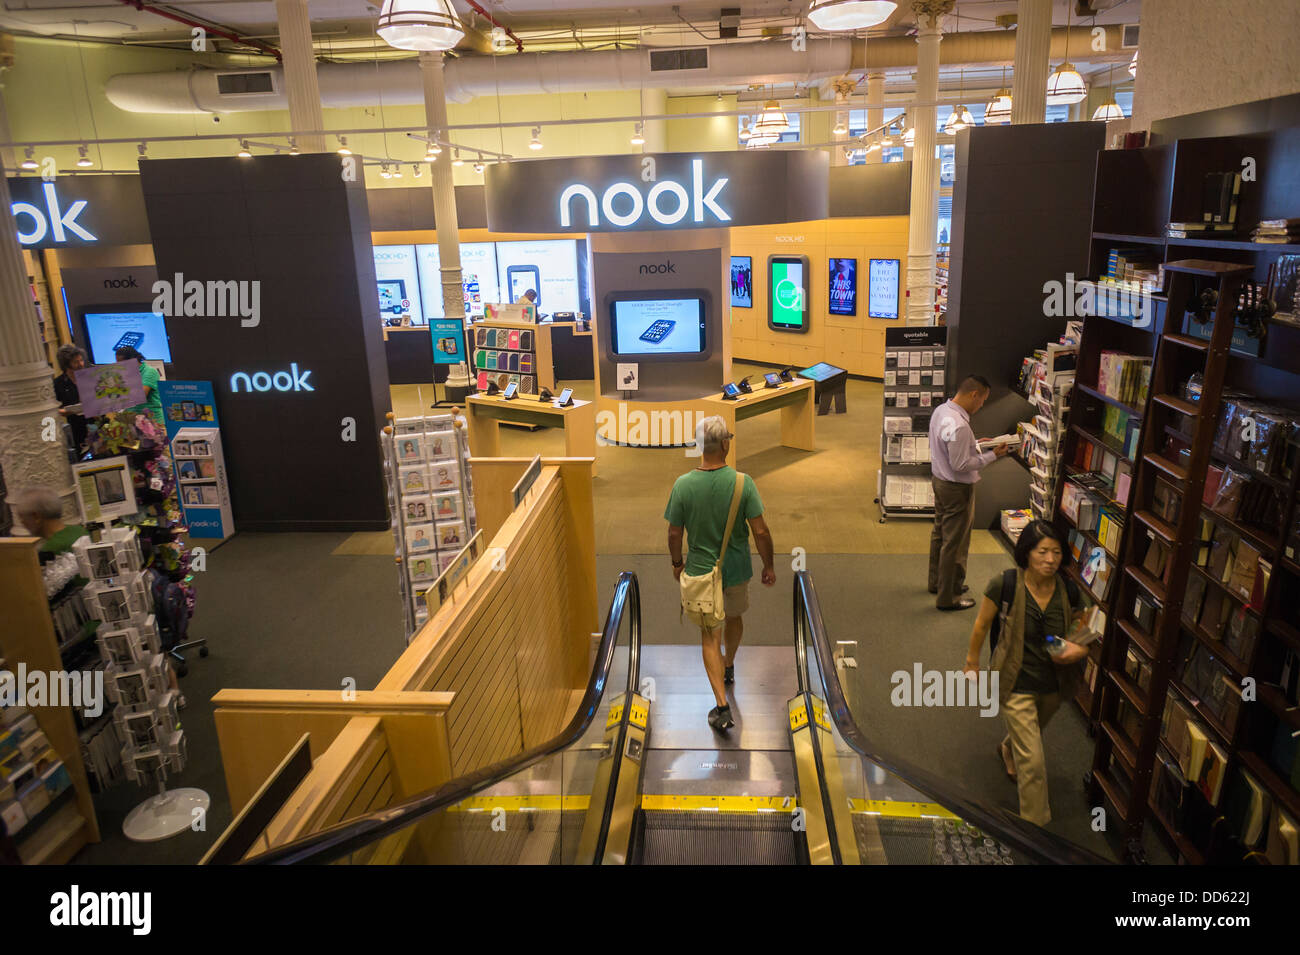 The Nook department in a Barnes & Noble bookstore Stock Photo